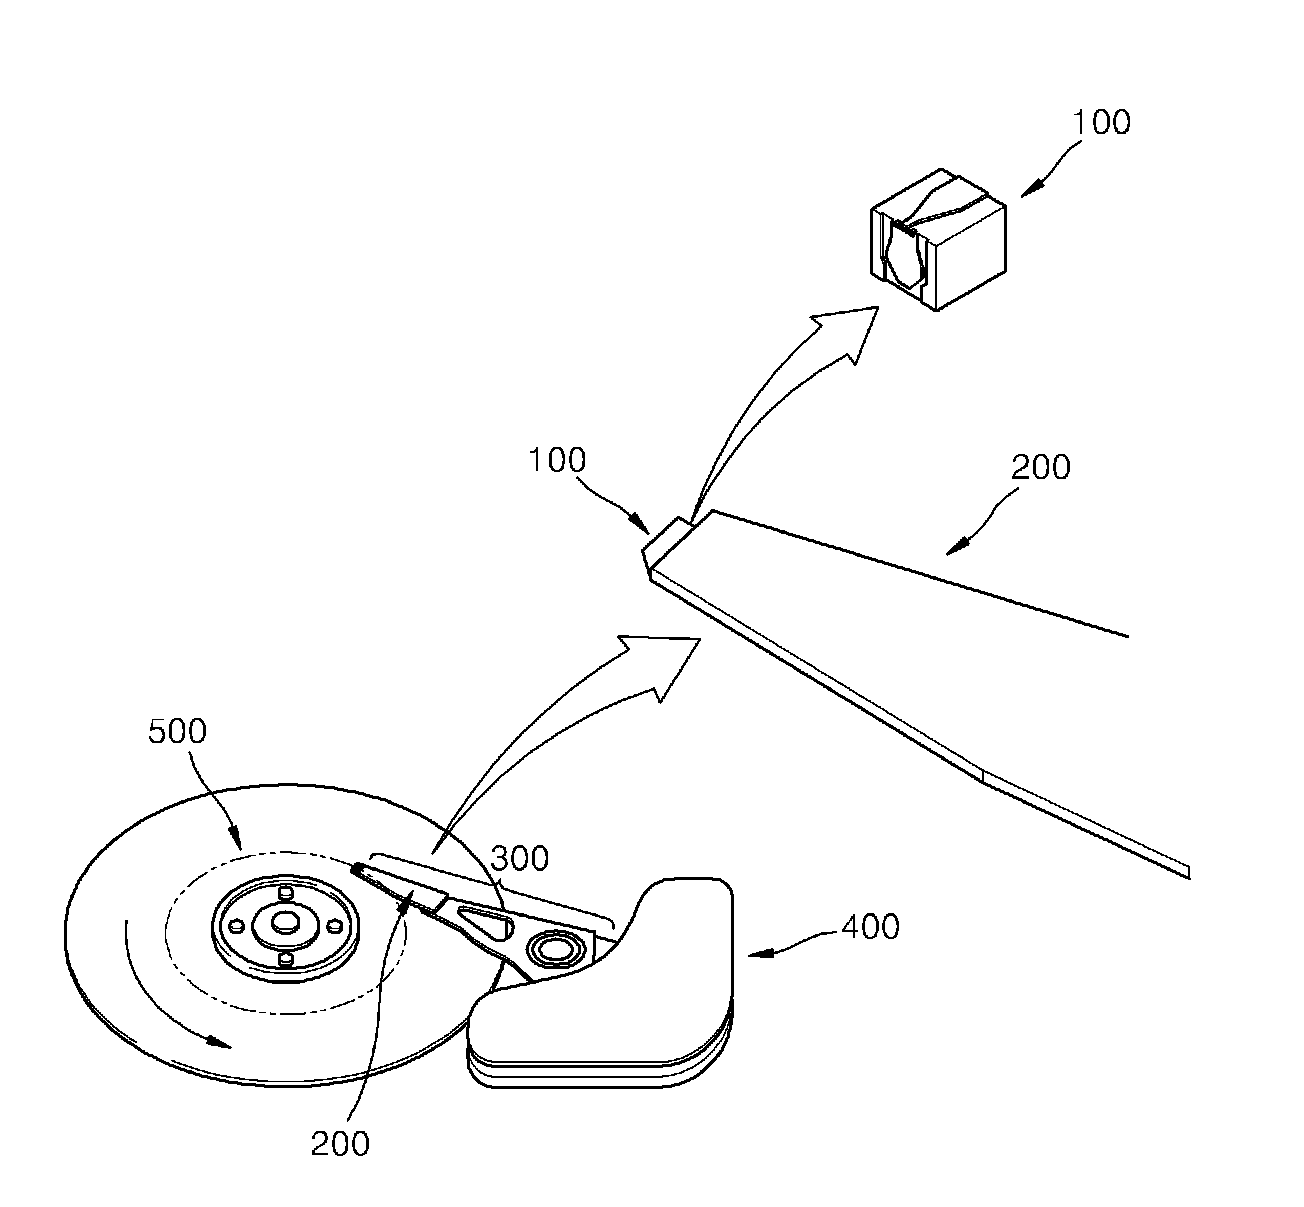 Electric field read/write head, method of manufacturing the electric field read/write head, and information storage device including the electric field read/write head